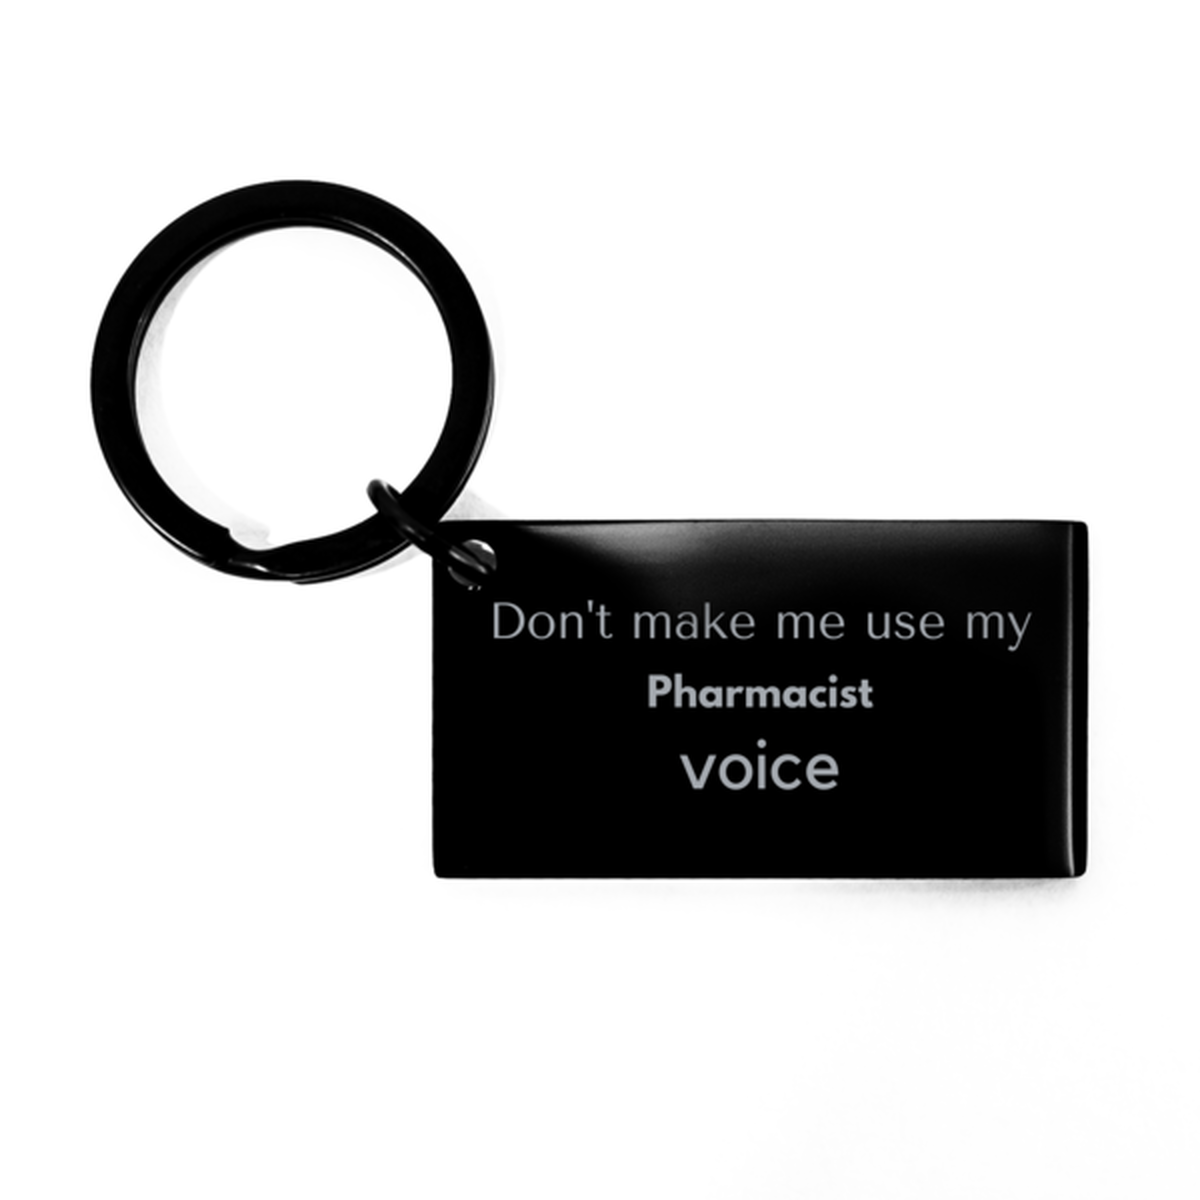 Don't make me use my Pharmacist voice, Sarcasm Pharmacist Gifts, Christmas Pharmacist Keychain Birthday Unique Gifts For Pharmacist Coworkers, Men, Women, Colleague, Friends